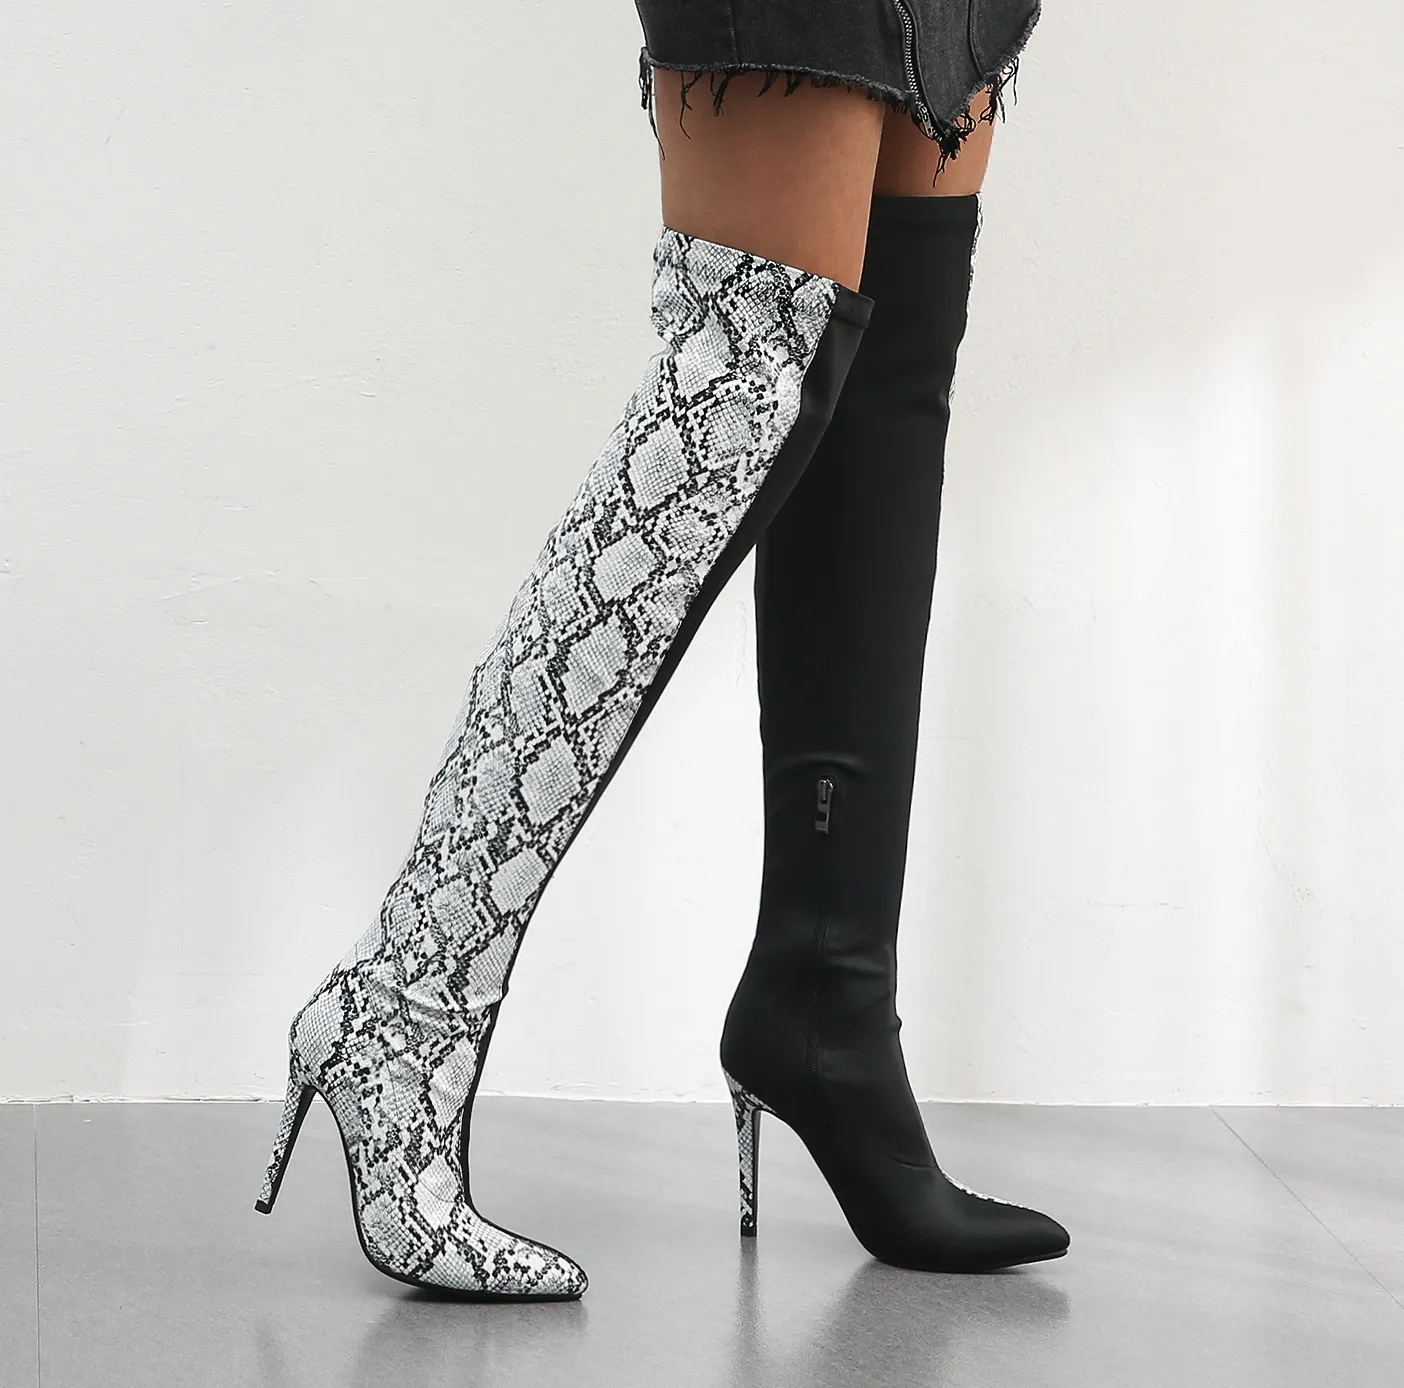 Snake Color Thigh-High Boots Ladies Pointy Large Size 34-43 Women's Boots 11CM High Heel Serpentine Fashion Roman Boots Girls Shoes 162-2